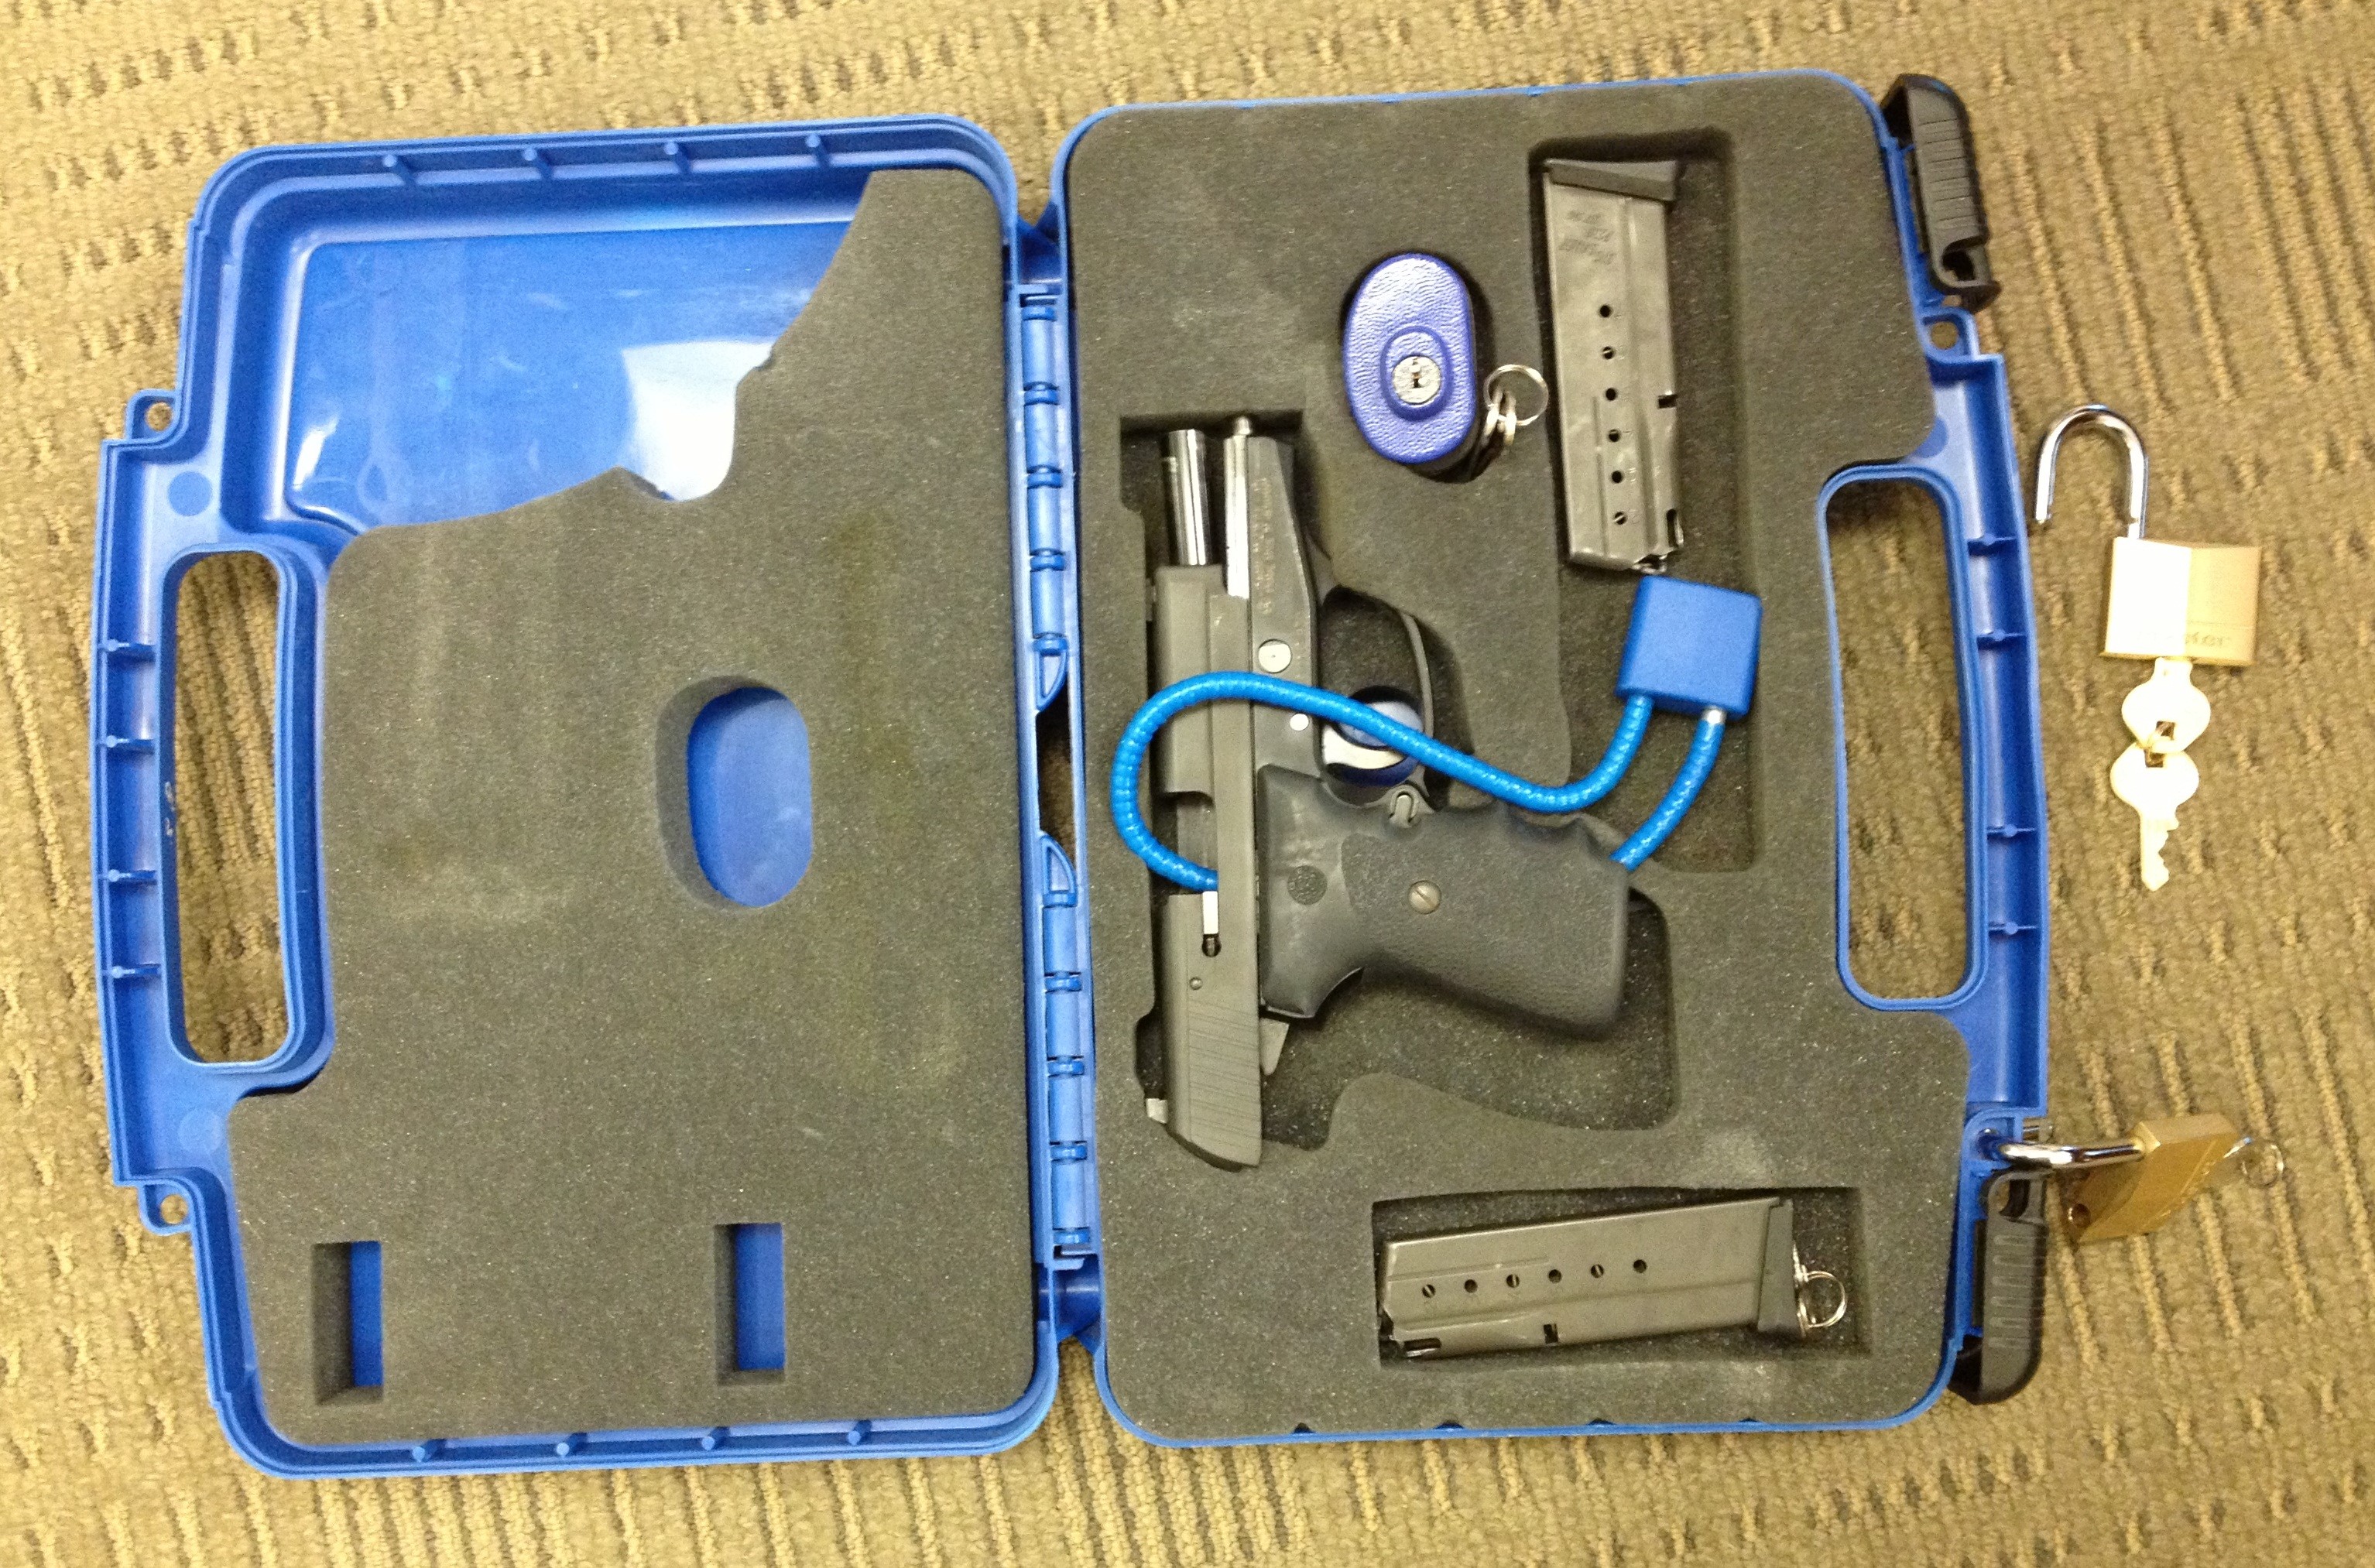 This is a properly packed firearm. Pack unloaded firearms in a locked hard-sided case. Take the case to the airline check-in counter to declare that you want to fly with it. The airline will transport it in the belly of the plane for the flight. (TSA photo)